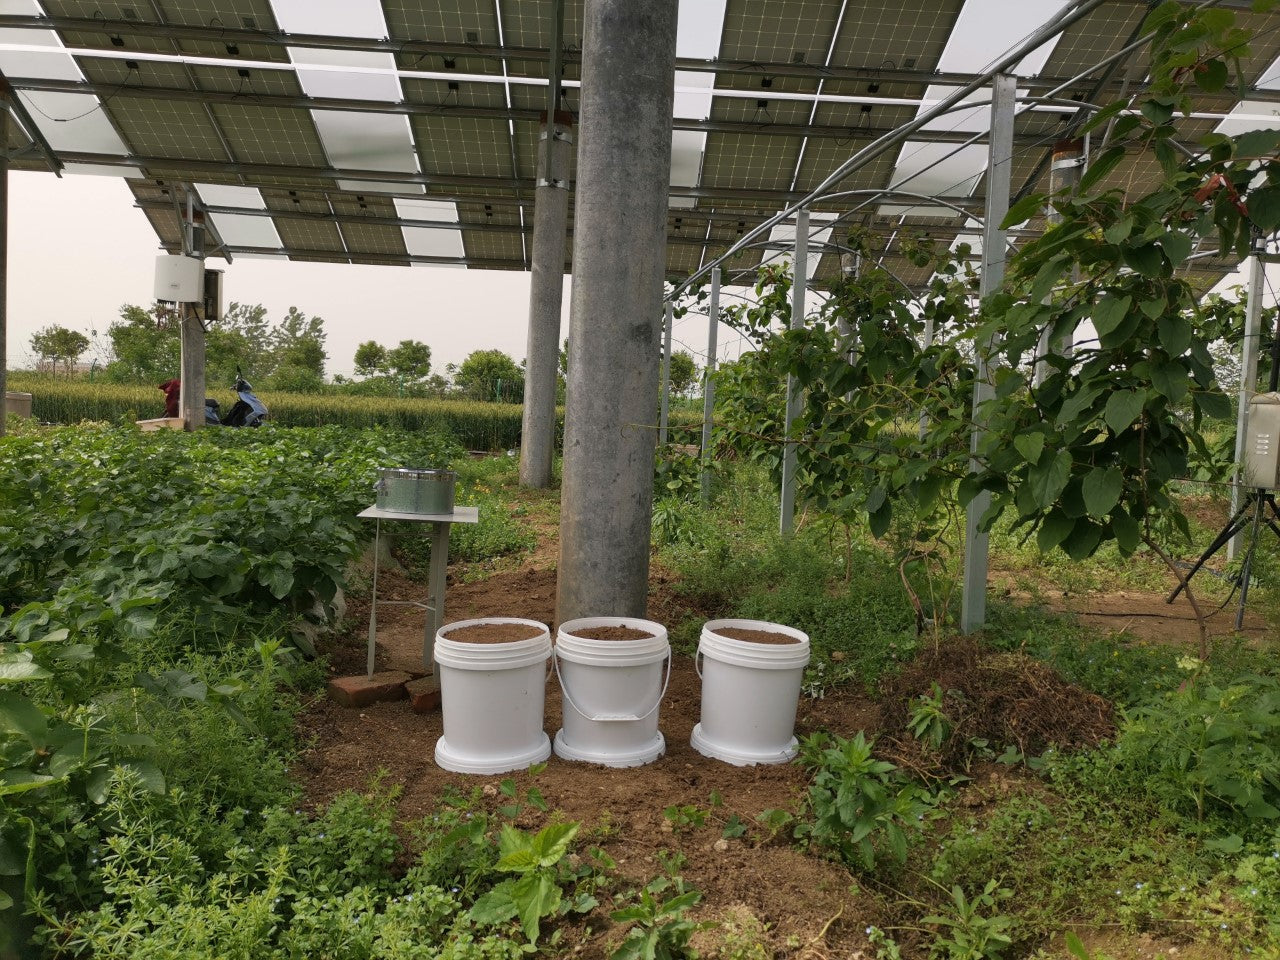 Agrivoltaics to reduce water evaporation